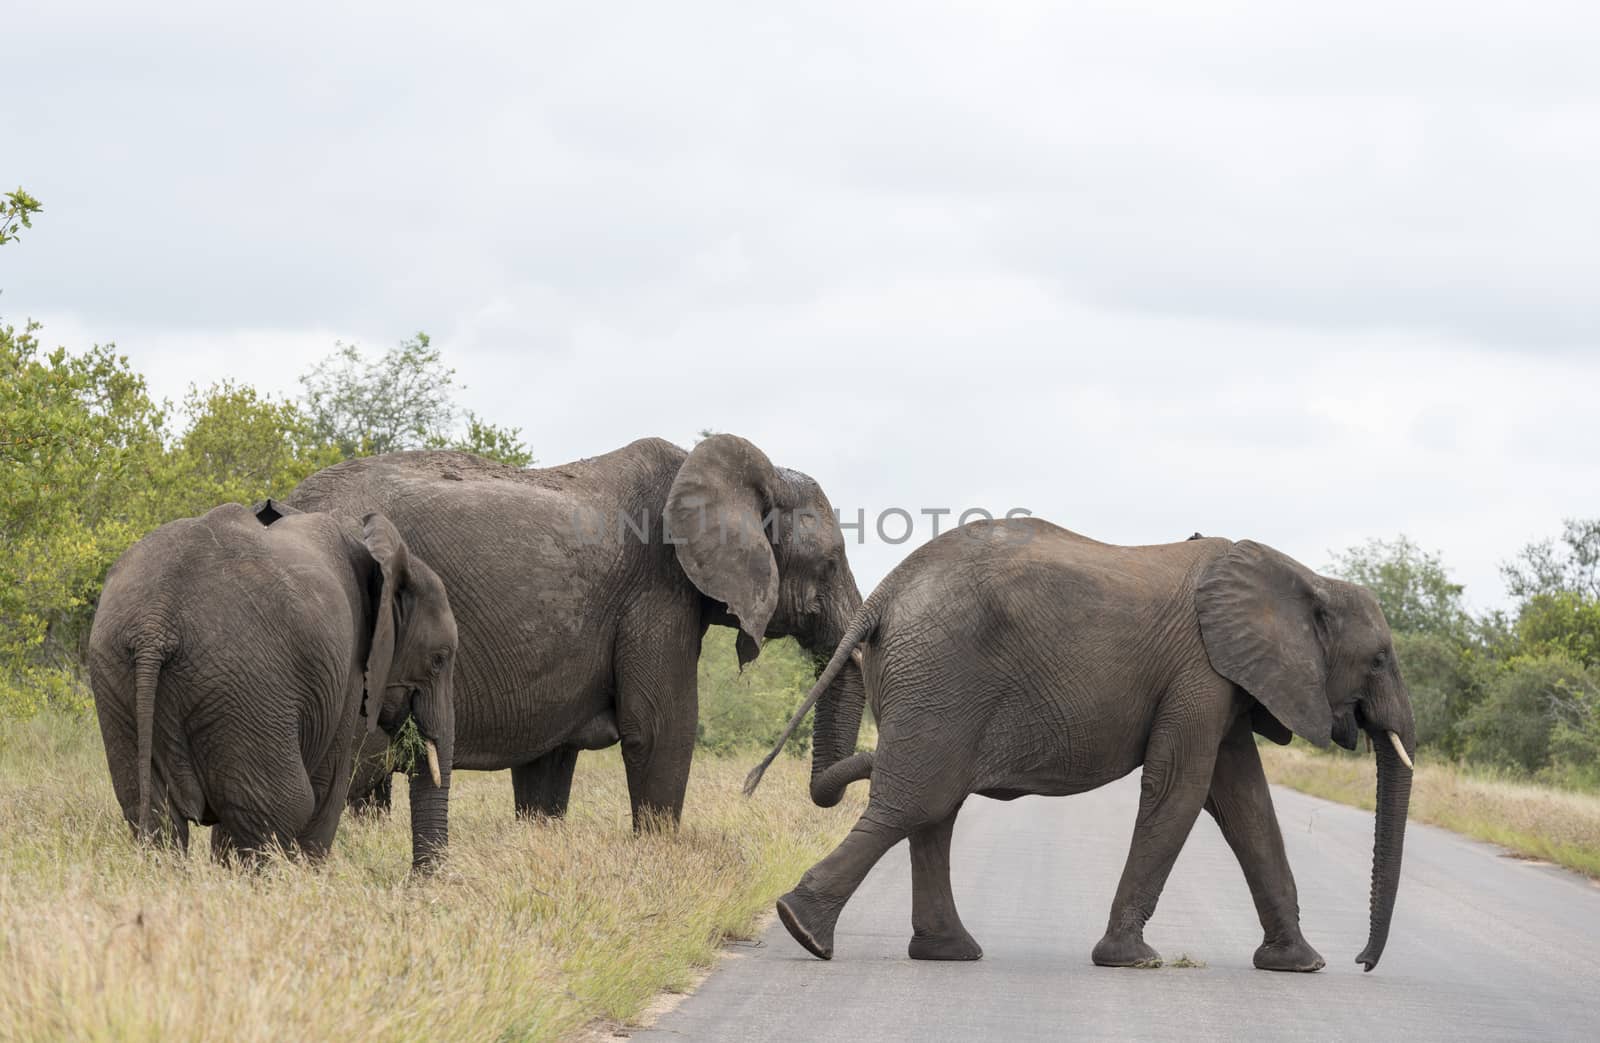 three elephants  crossing the road in national kruger wild park south africa near hoedspruit at te orphan gate